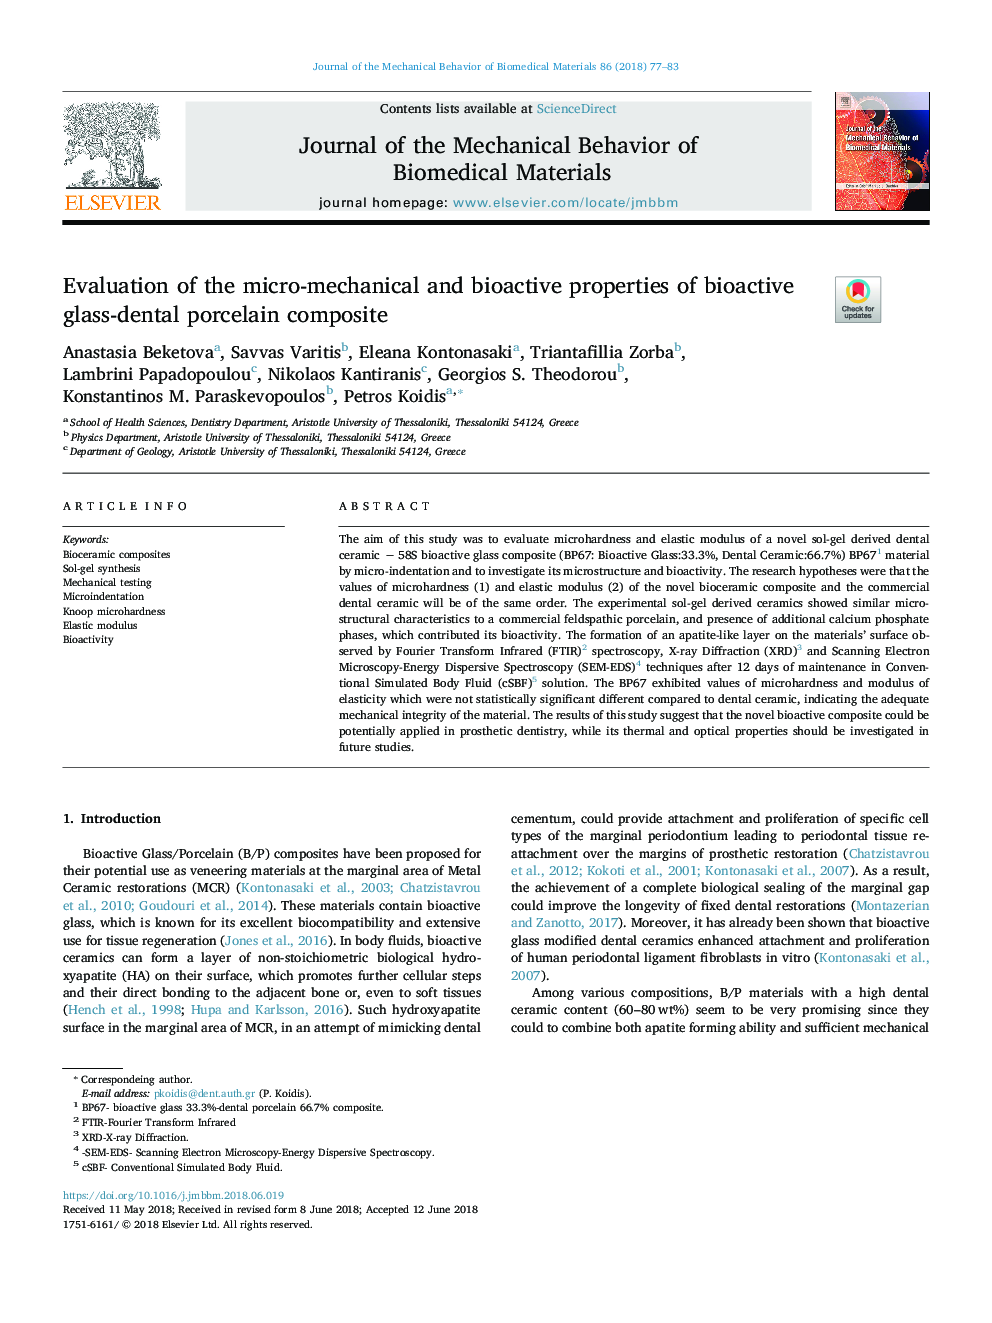 Evaluation of the micro-mechanical and bioactive properties of bioactive glass-dental porcelain composite